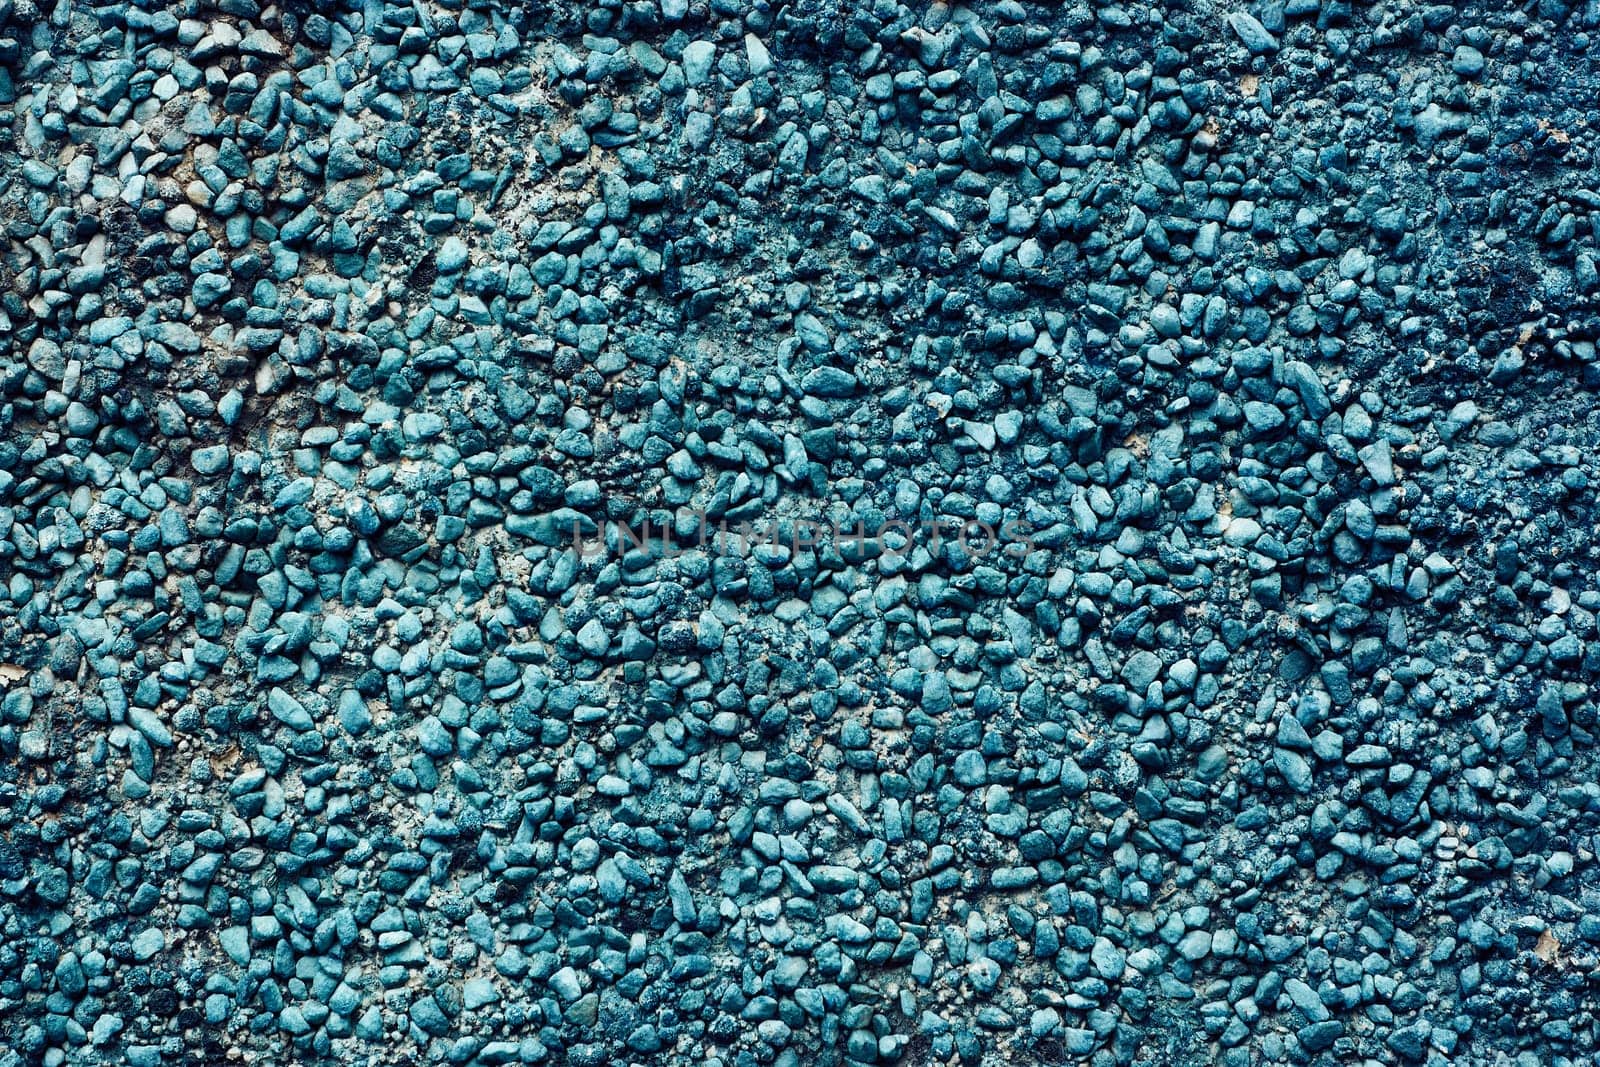 Texture of dark blue pebbles, abstract background of small stones